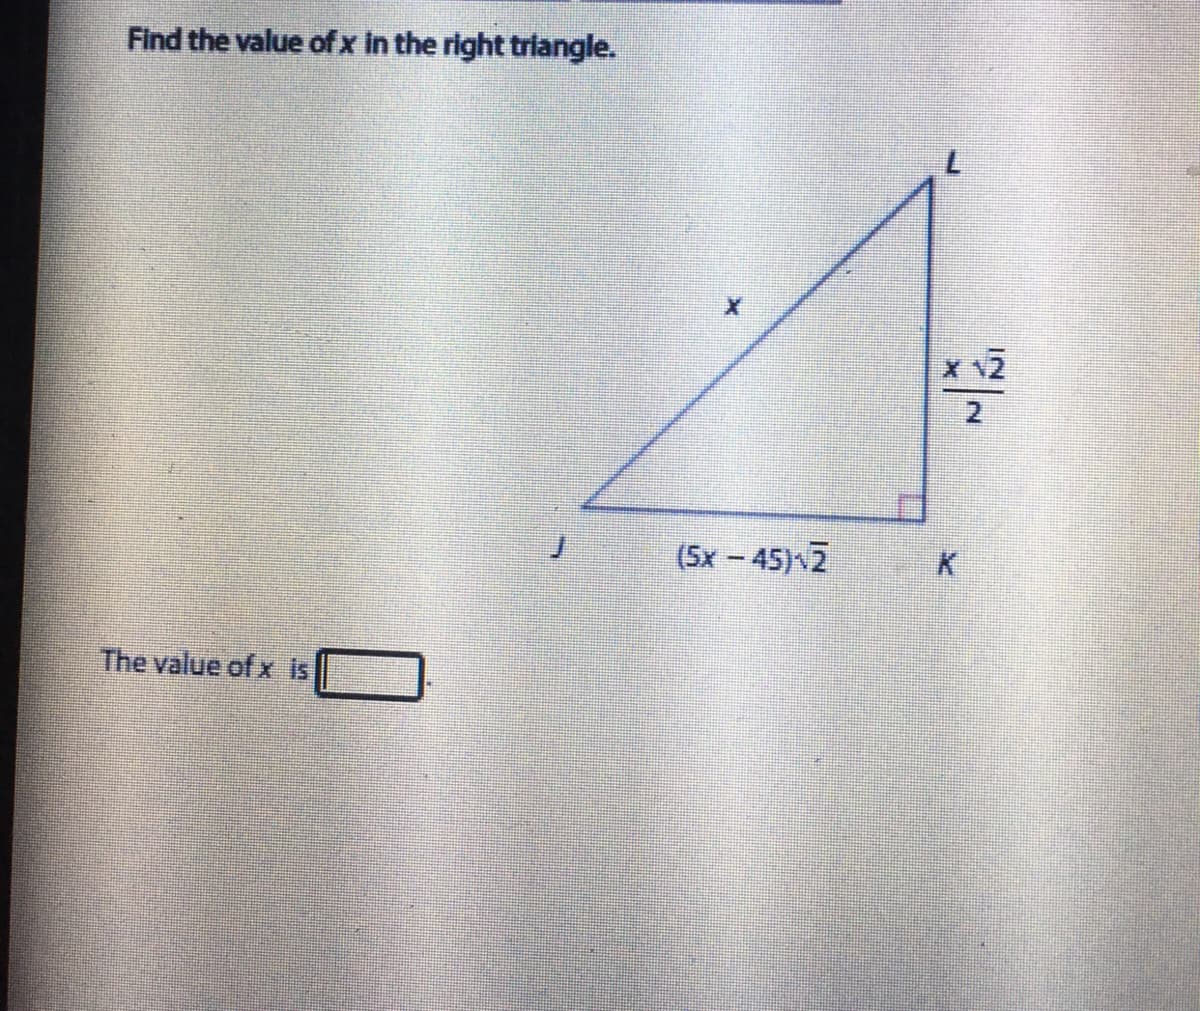 Find the value ofx in the right triangle.
(5x-45) 2
The value of x is
1.
